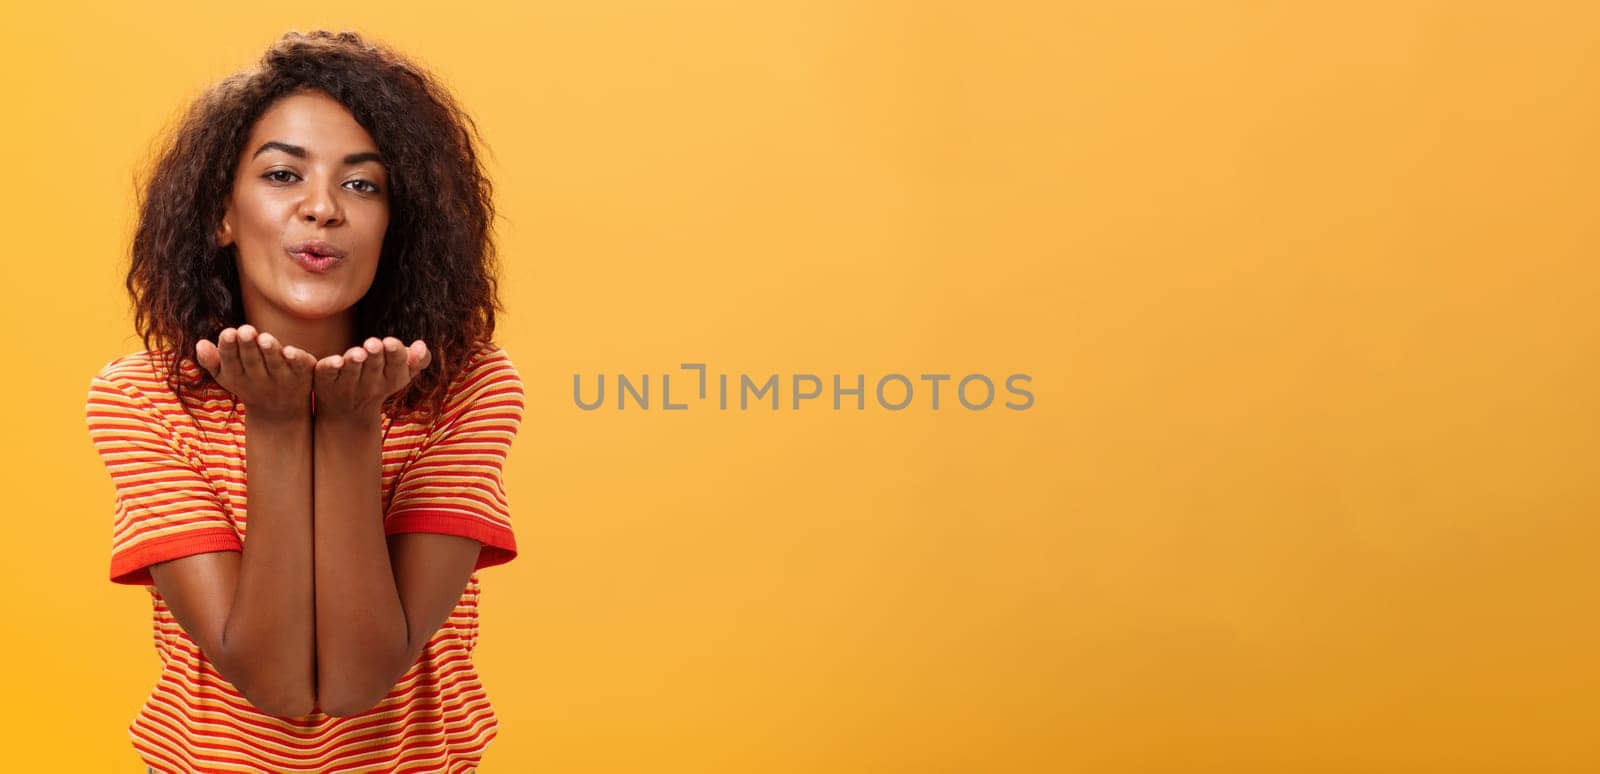 Sending passionate kiss to most loving person. Romantic attractive and stylish young african american girlfriend with curly hairstyle bending towards camera with slight smile, folded lips blowing mwah.